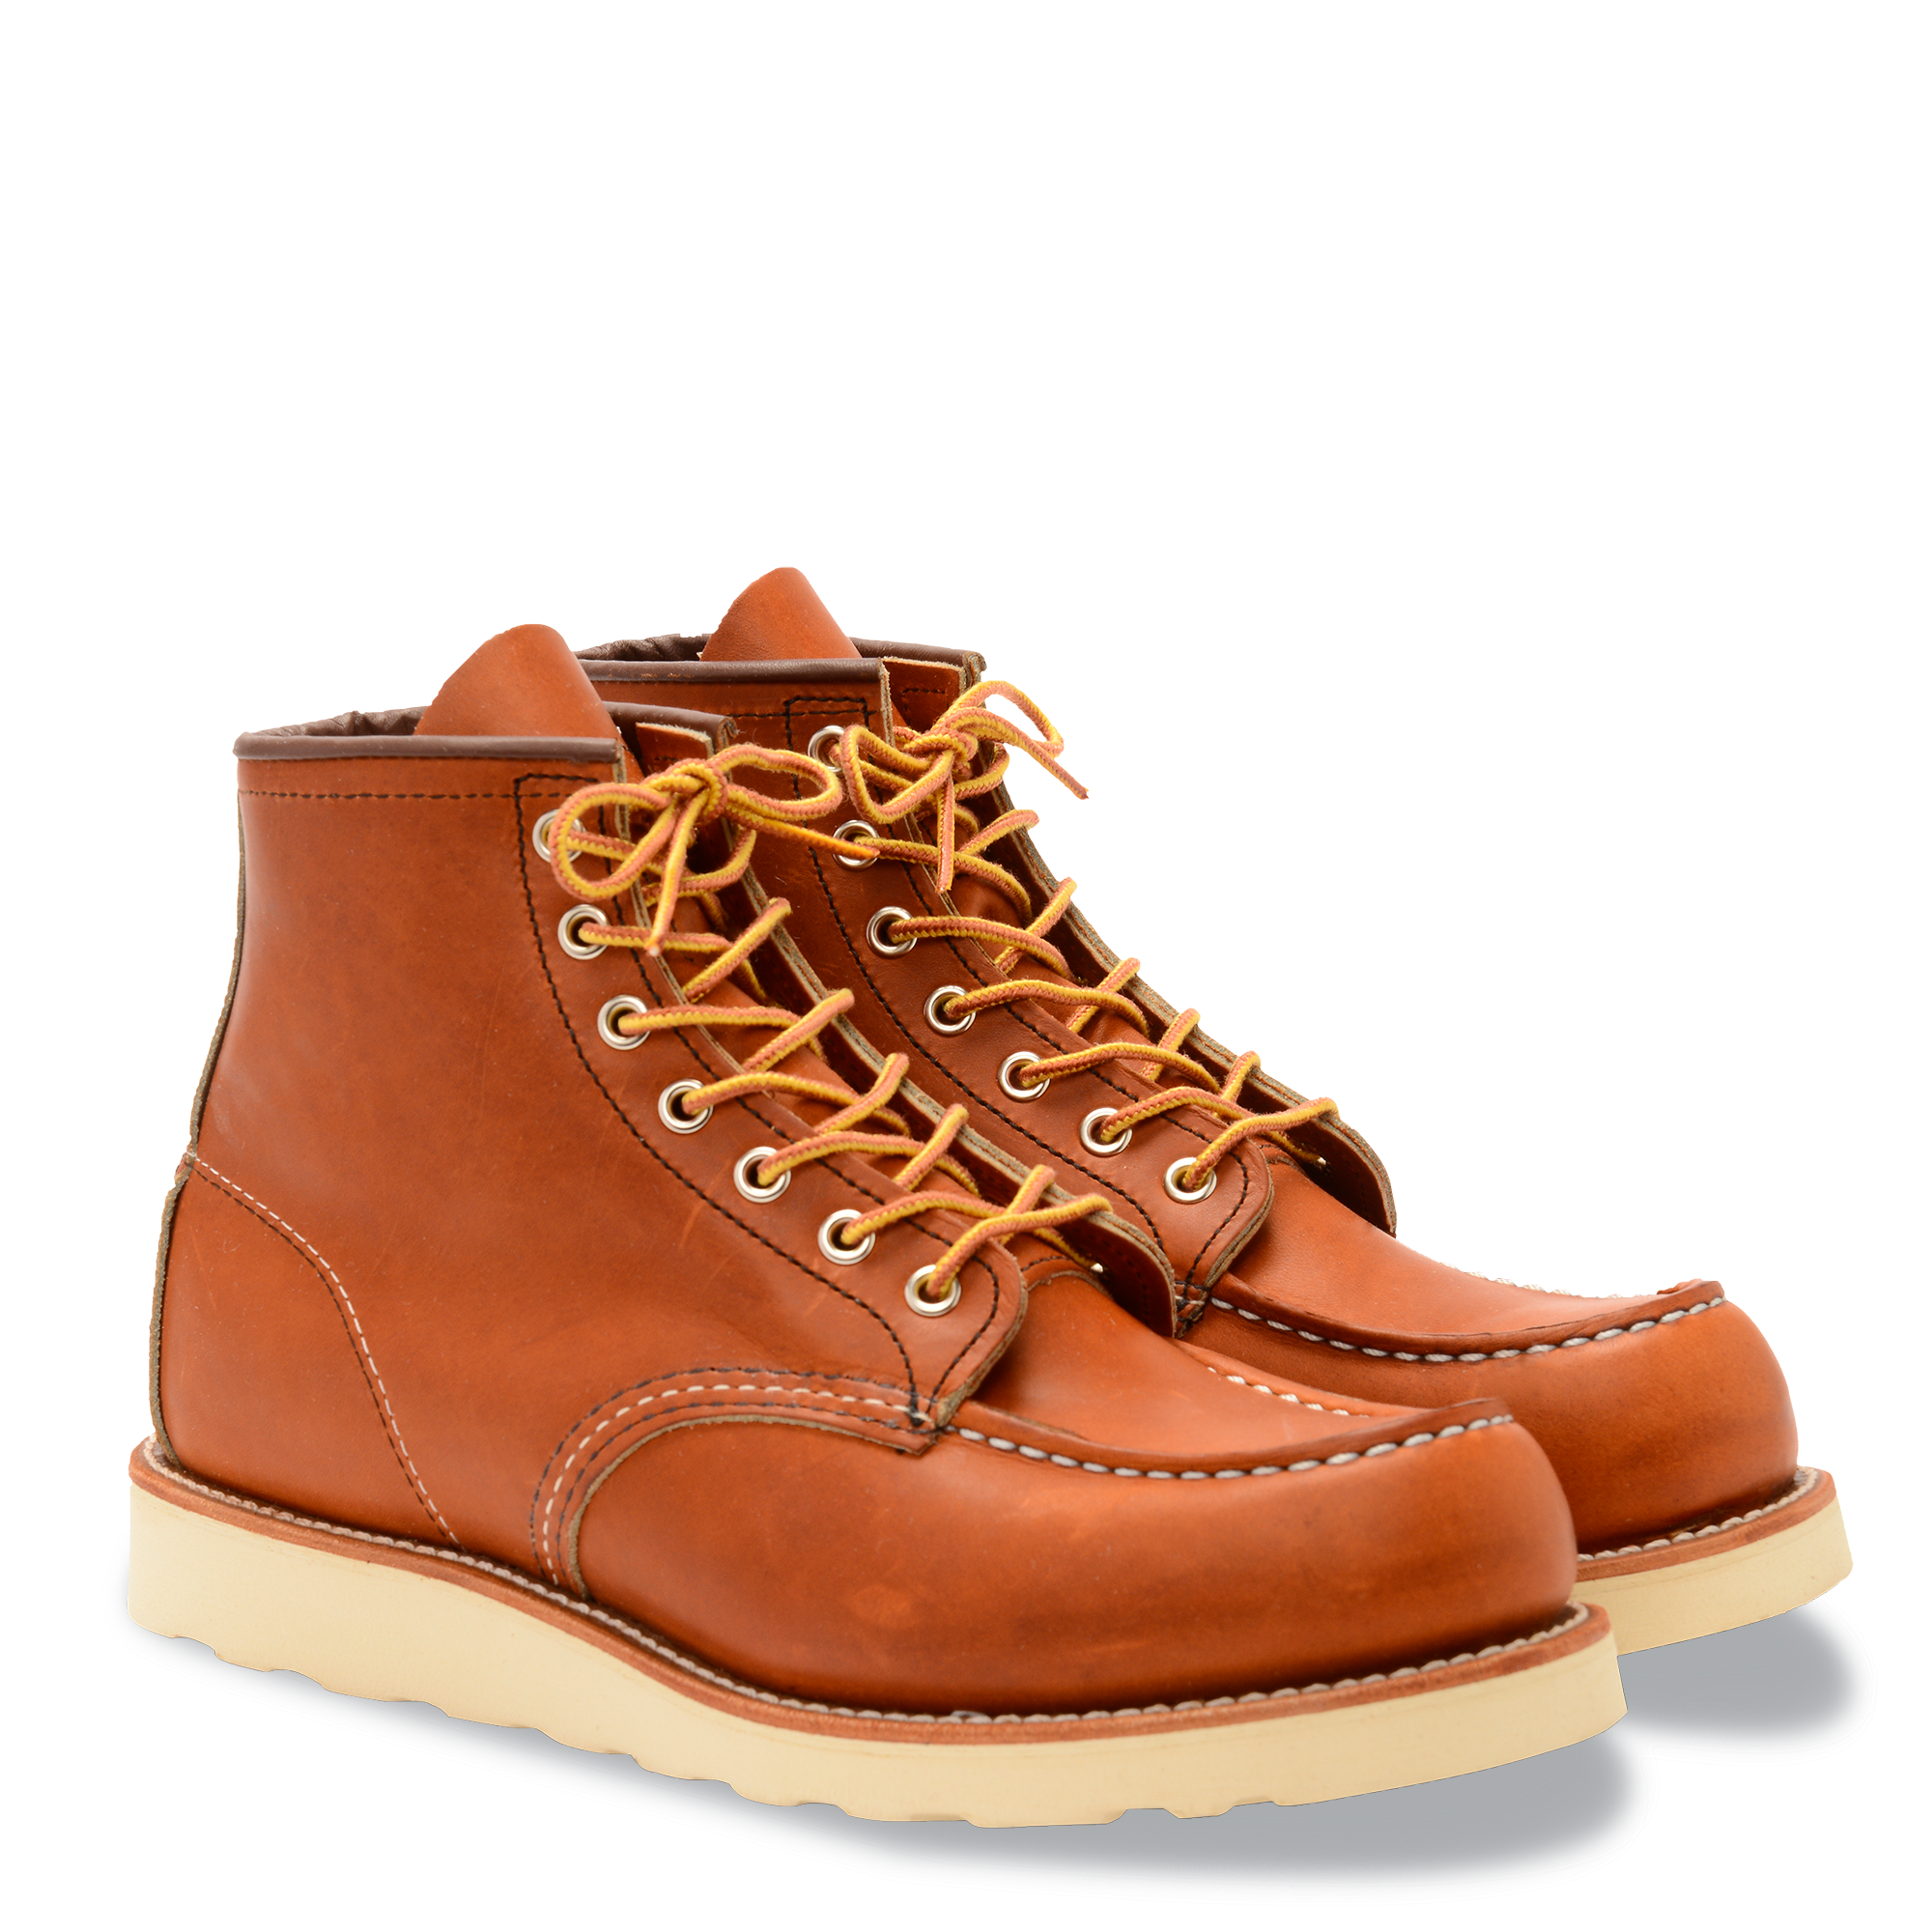 Total 63+ imagen red wing shoes moc toe